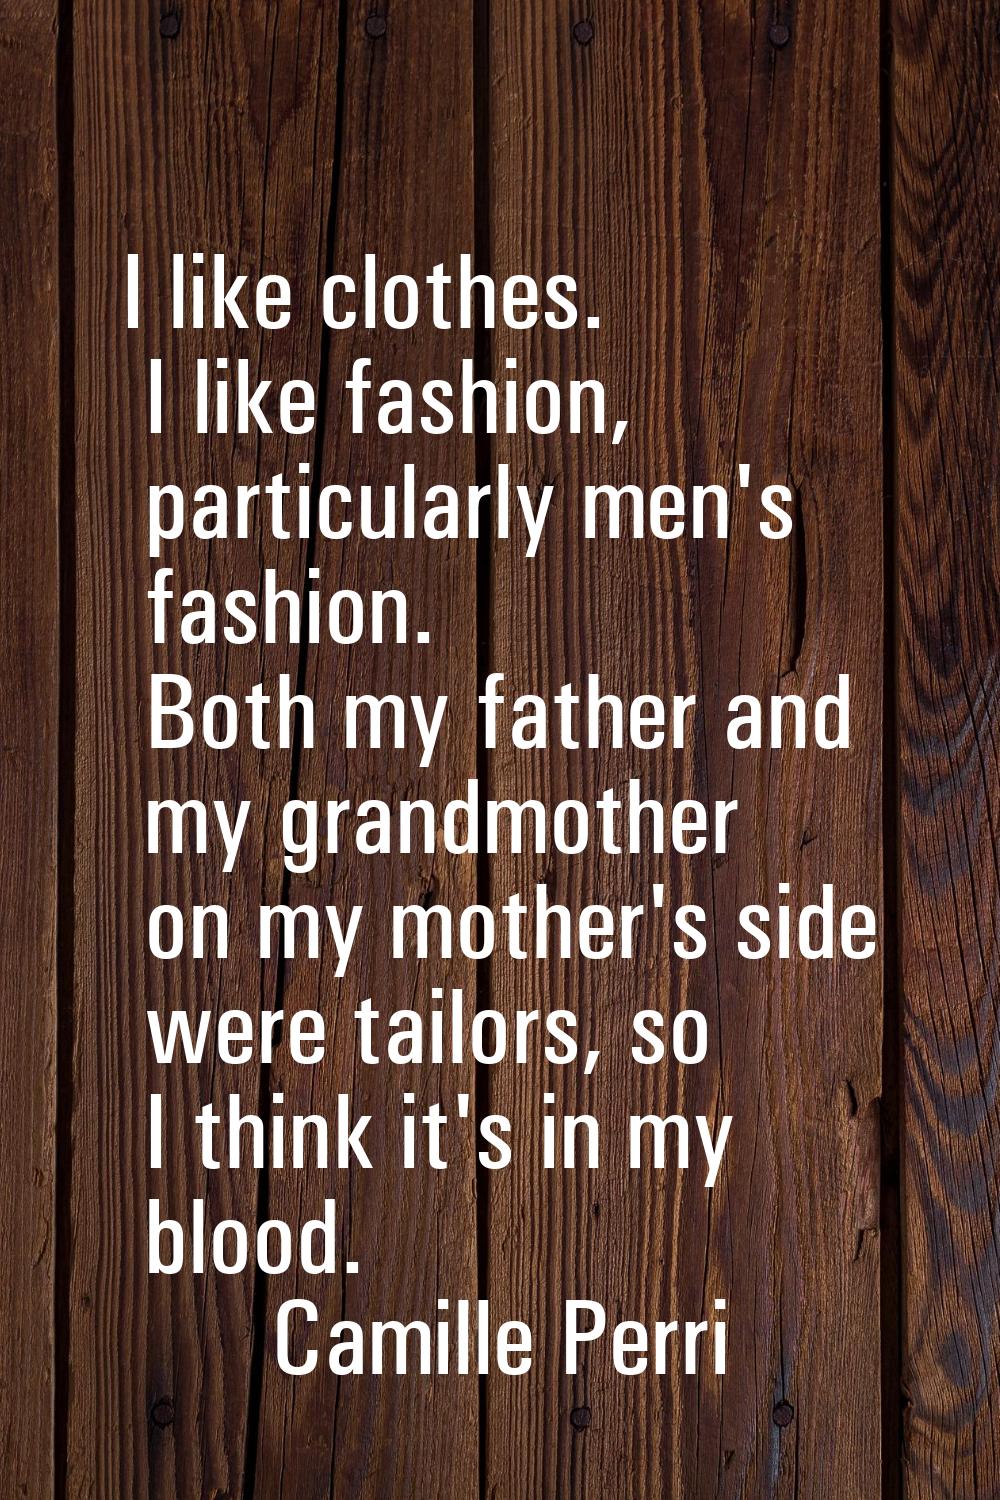 I like clothes. I like fashion, particularly men's fashion. Both my father and my grandmother on my